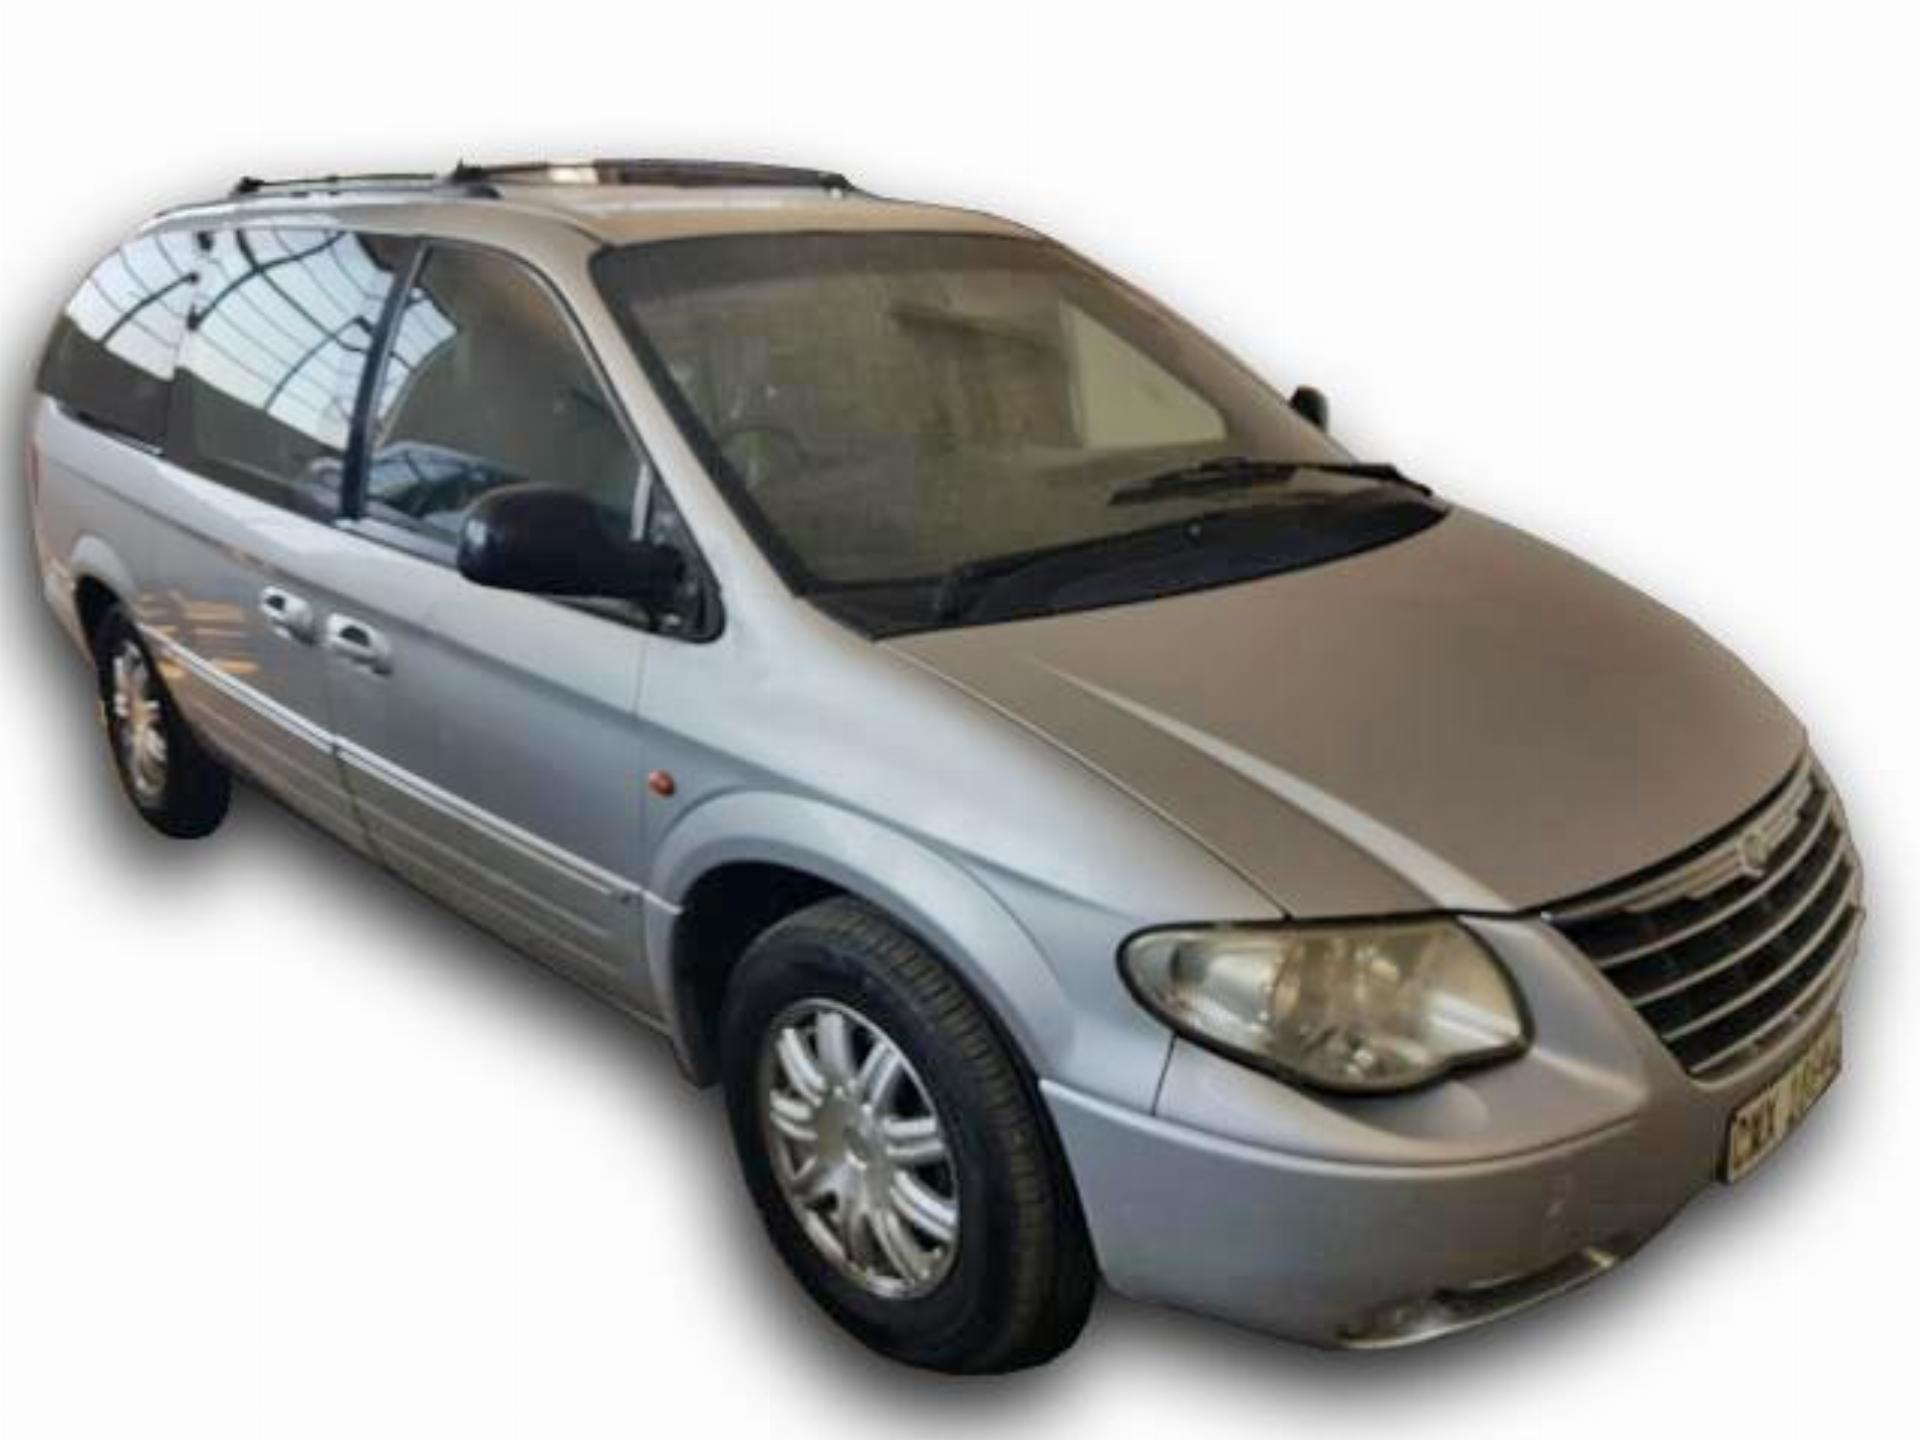 Used Chrysler Crysler Voyager 3.3 Limited Auto 2005 on